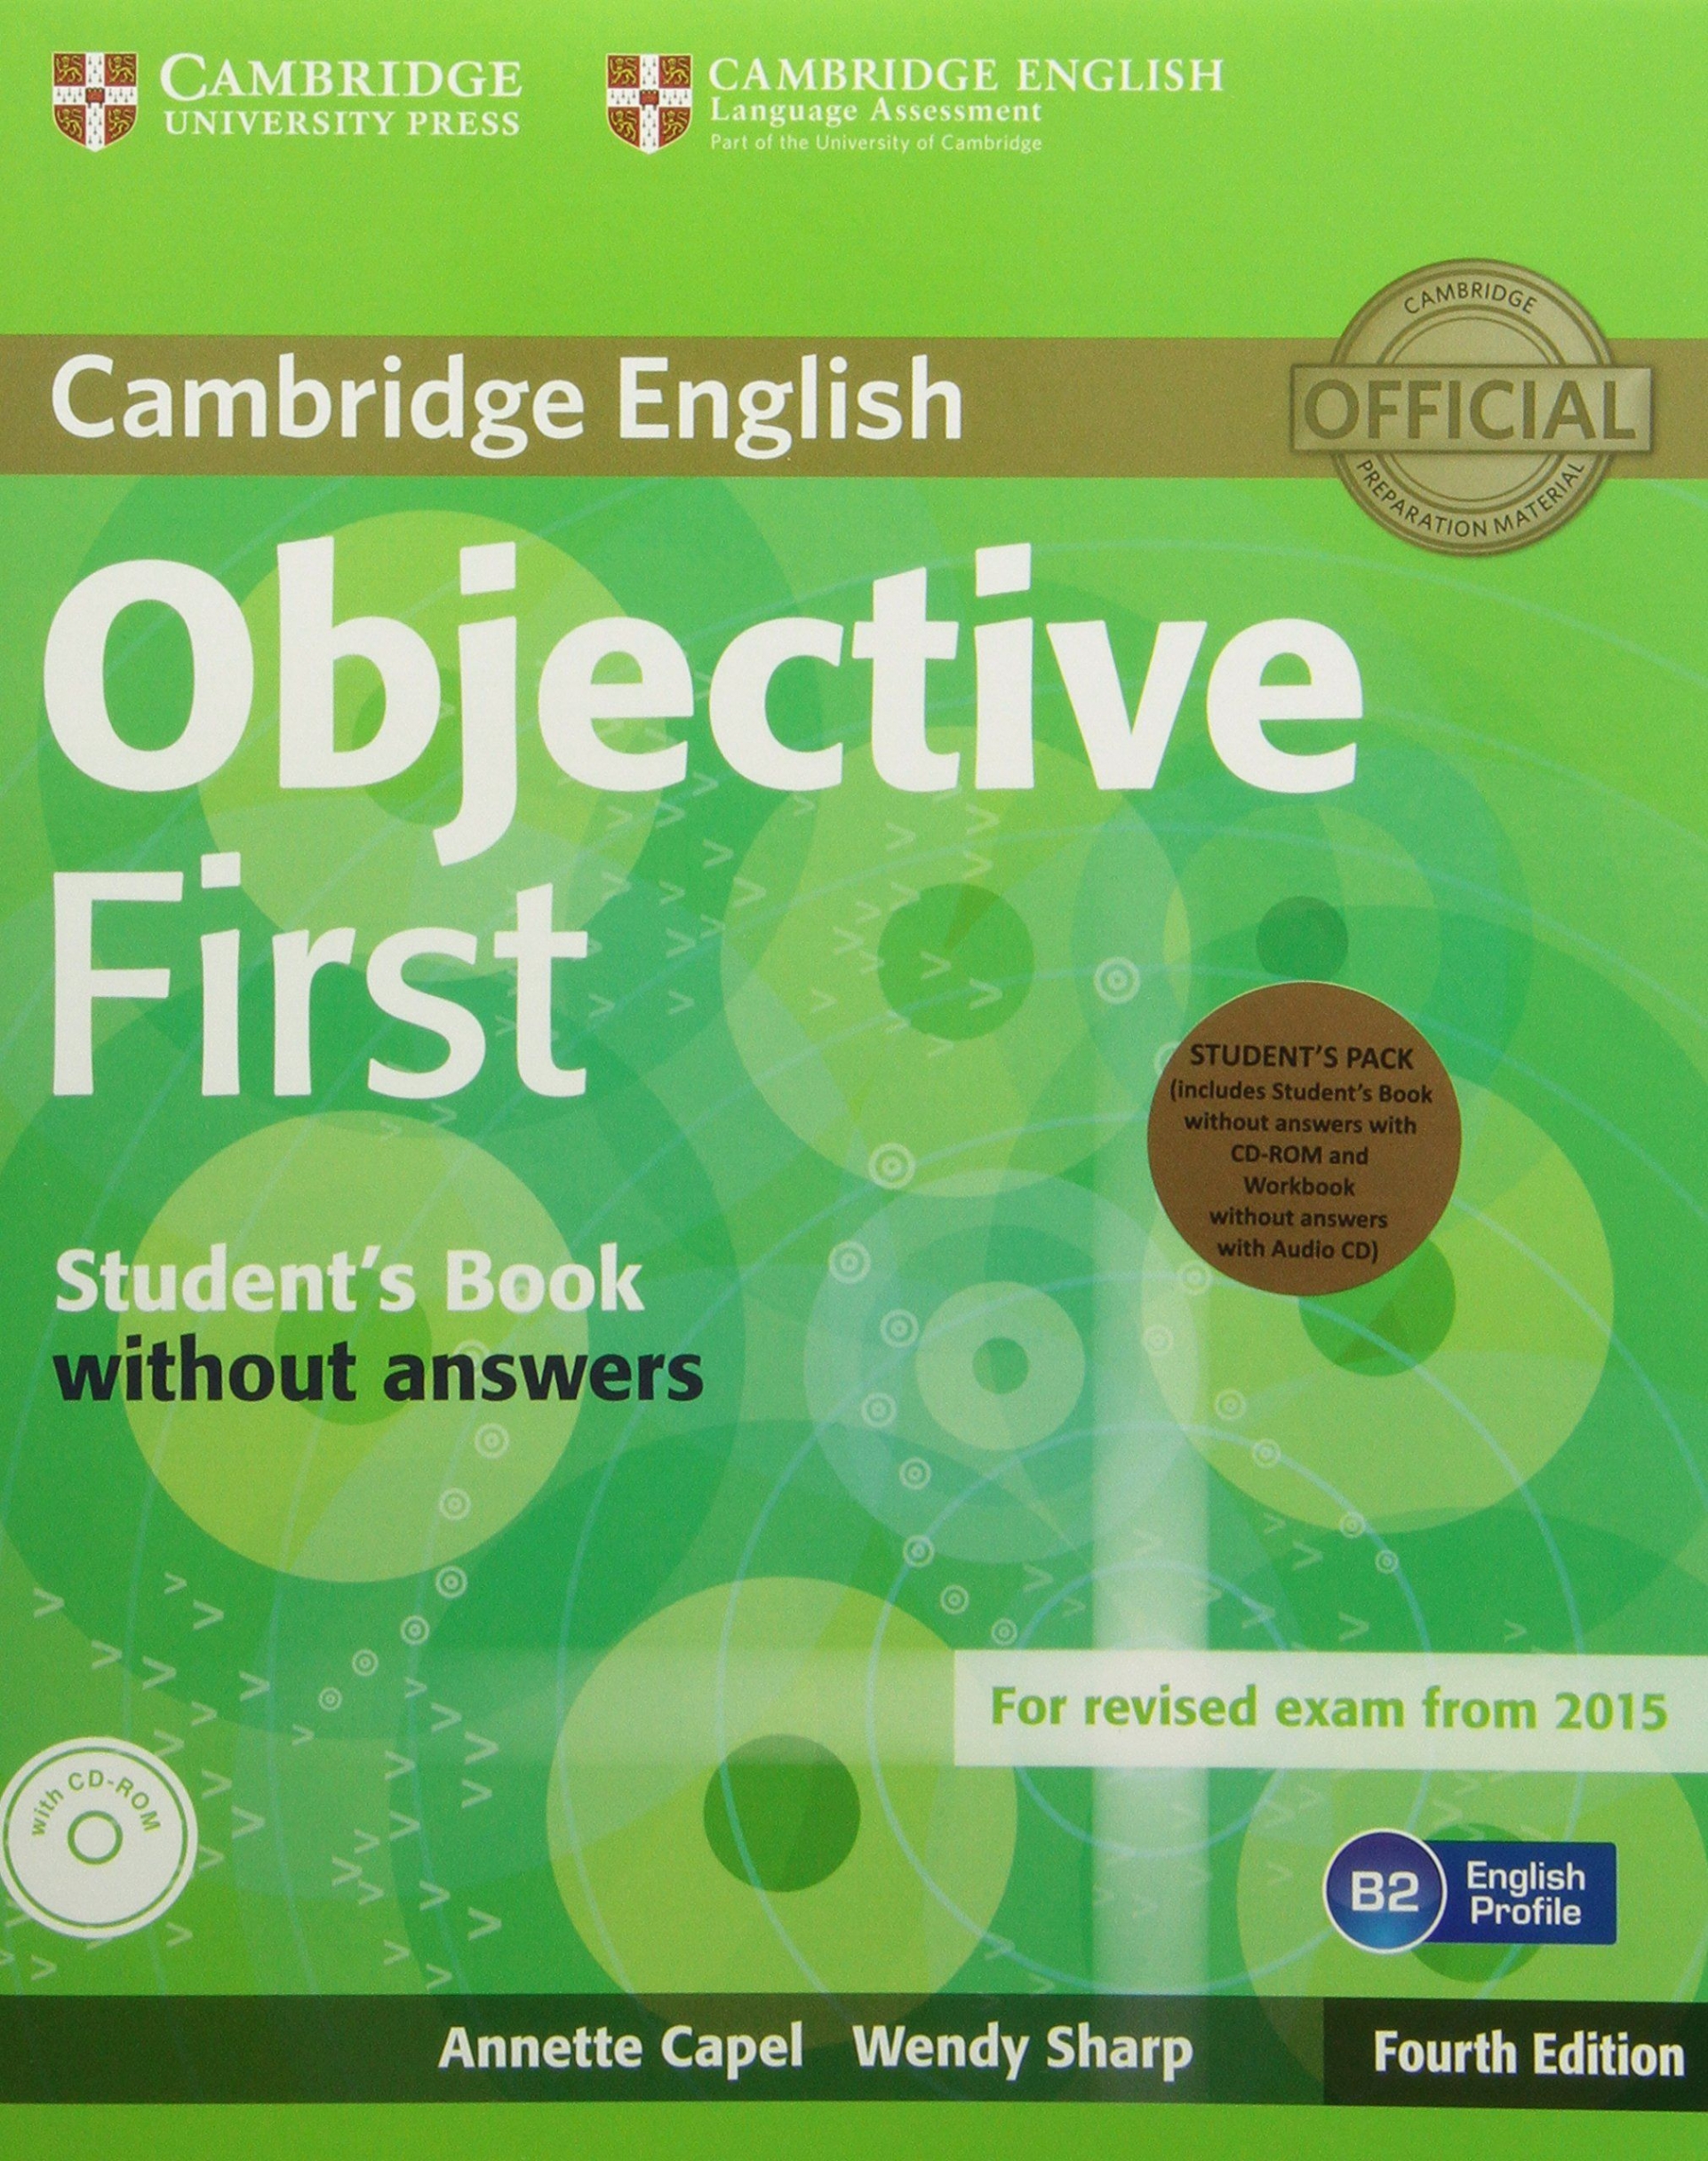 Annette Capel, Wendy Sharp Objective First 4th Edition (for revised exam 2015) Student's Pack (Student's Book without Answers with CD-ROM, Workbook without Answers with Audio CD) 